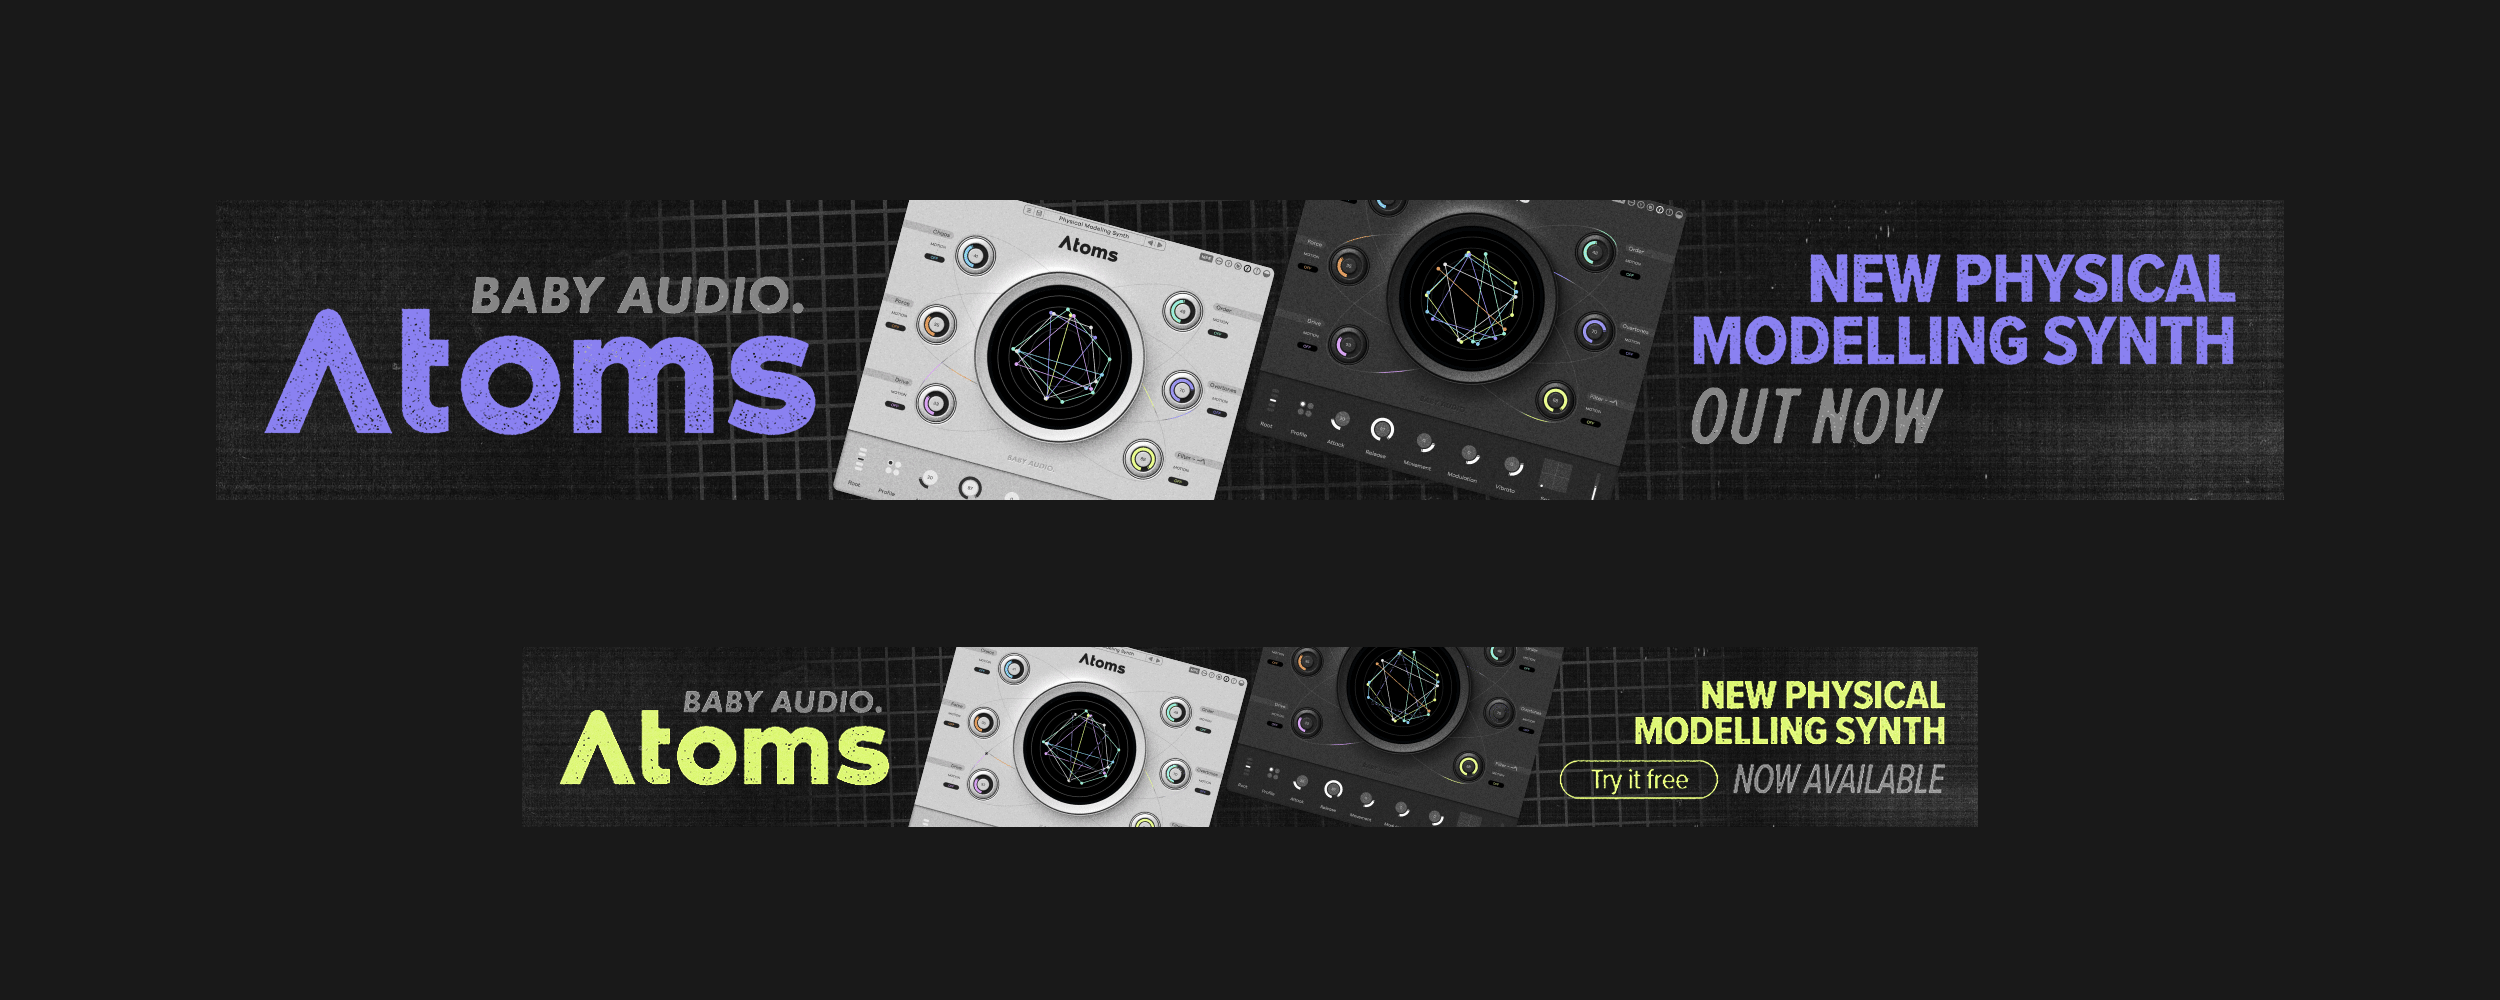 Atoms by Baby Audio banner ads website